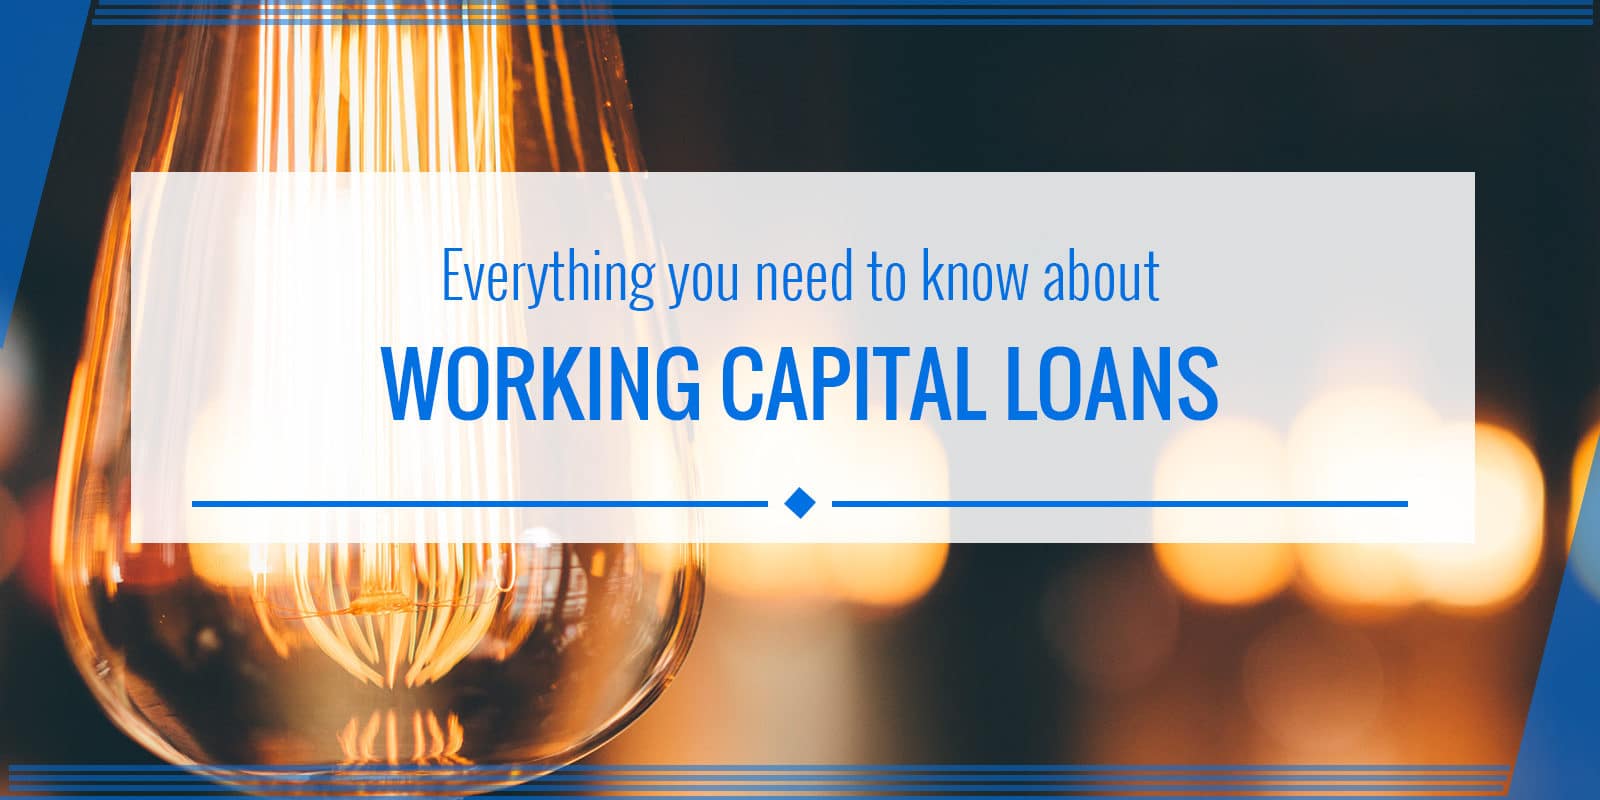 Working Capital Loans The Definitive Guide (2020 Update)